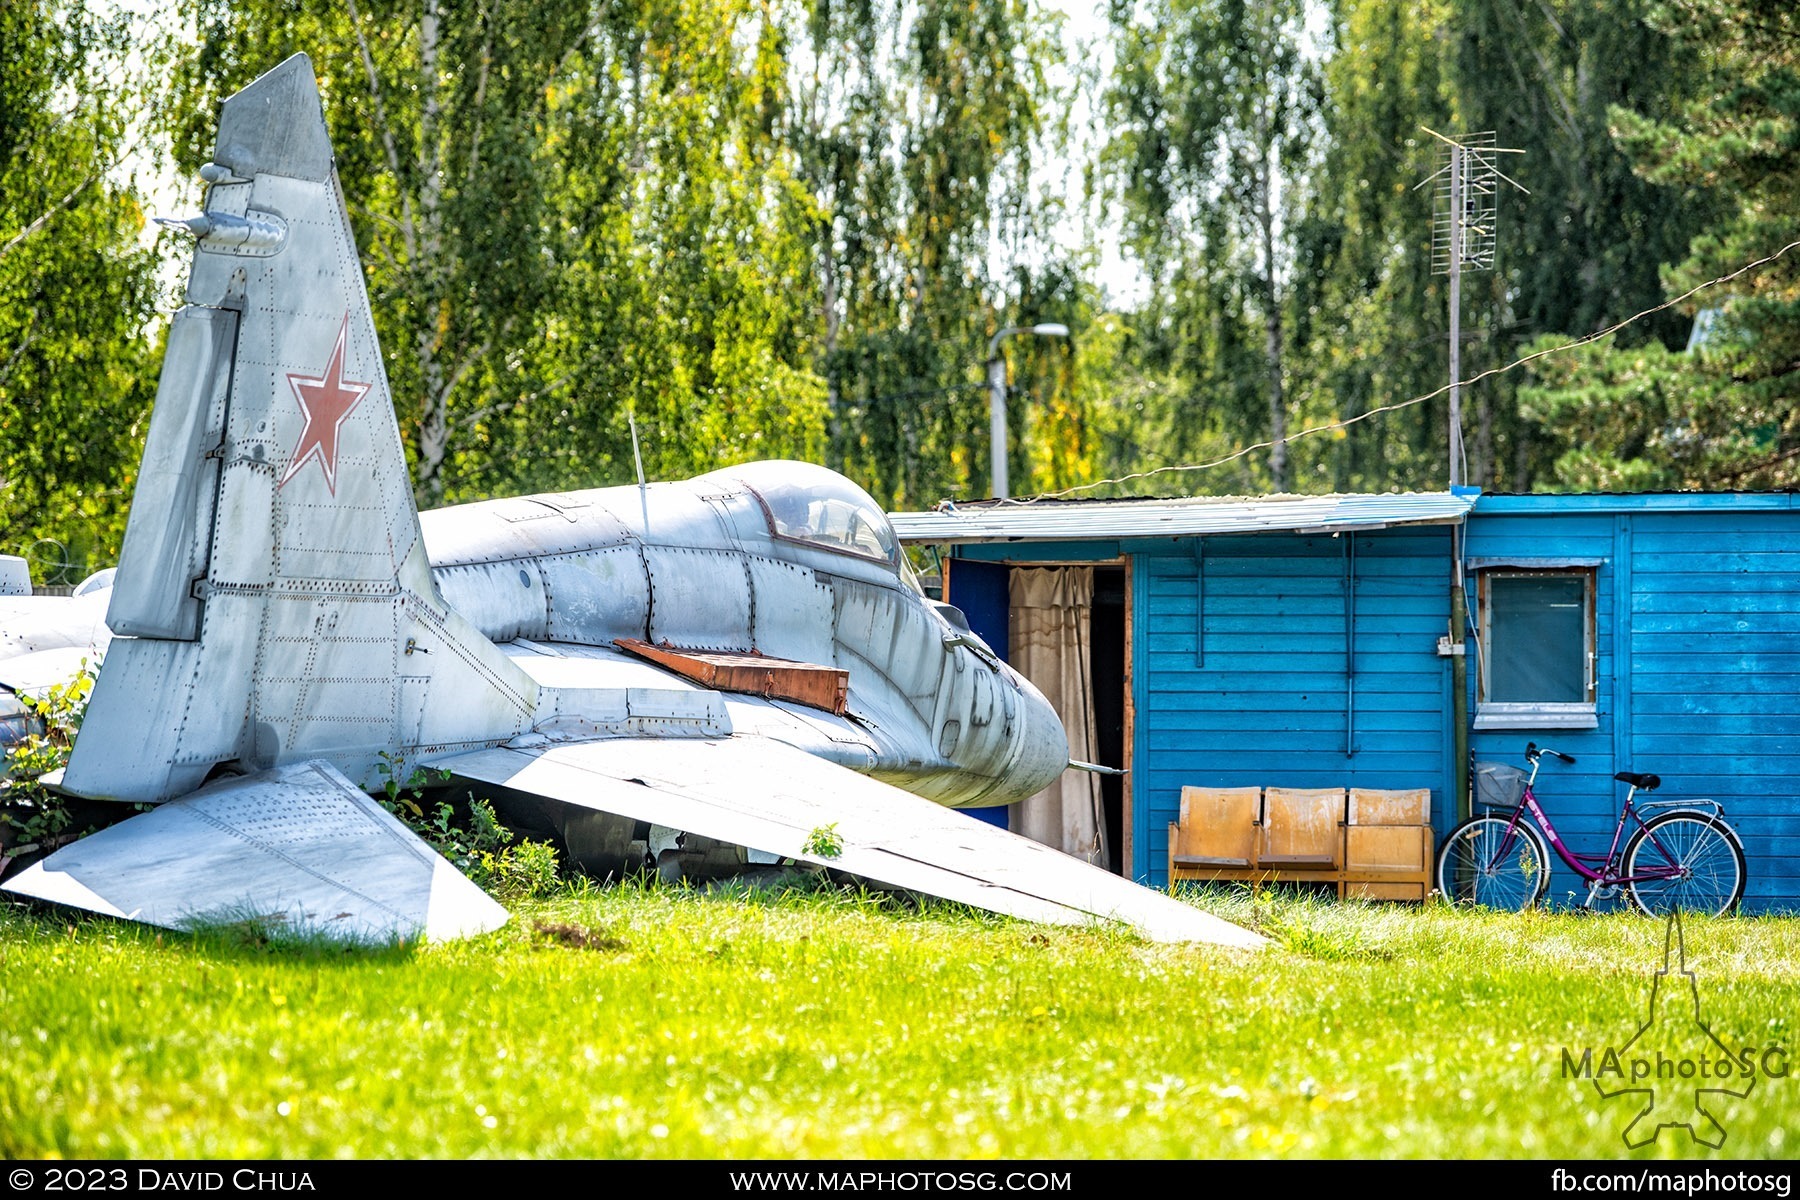 Mikoyan MiG-29 lay without undercarriage in front of a shed